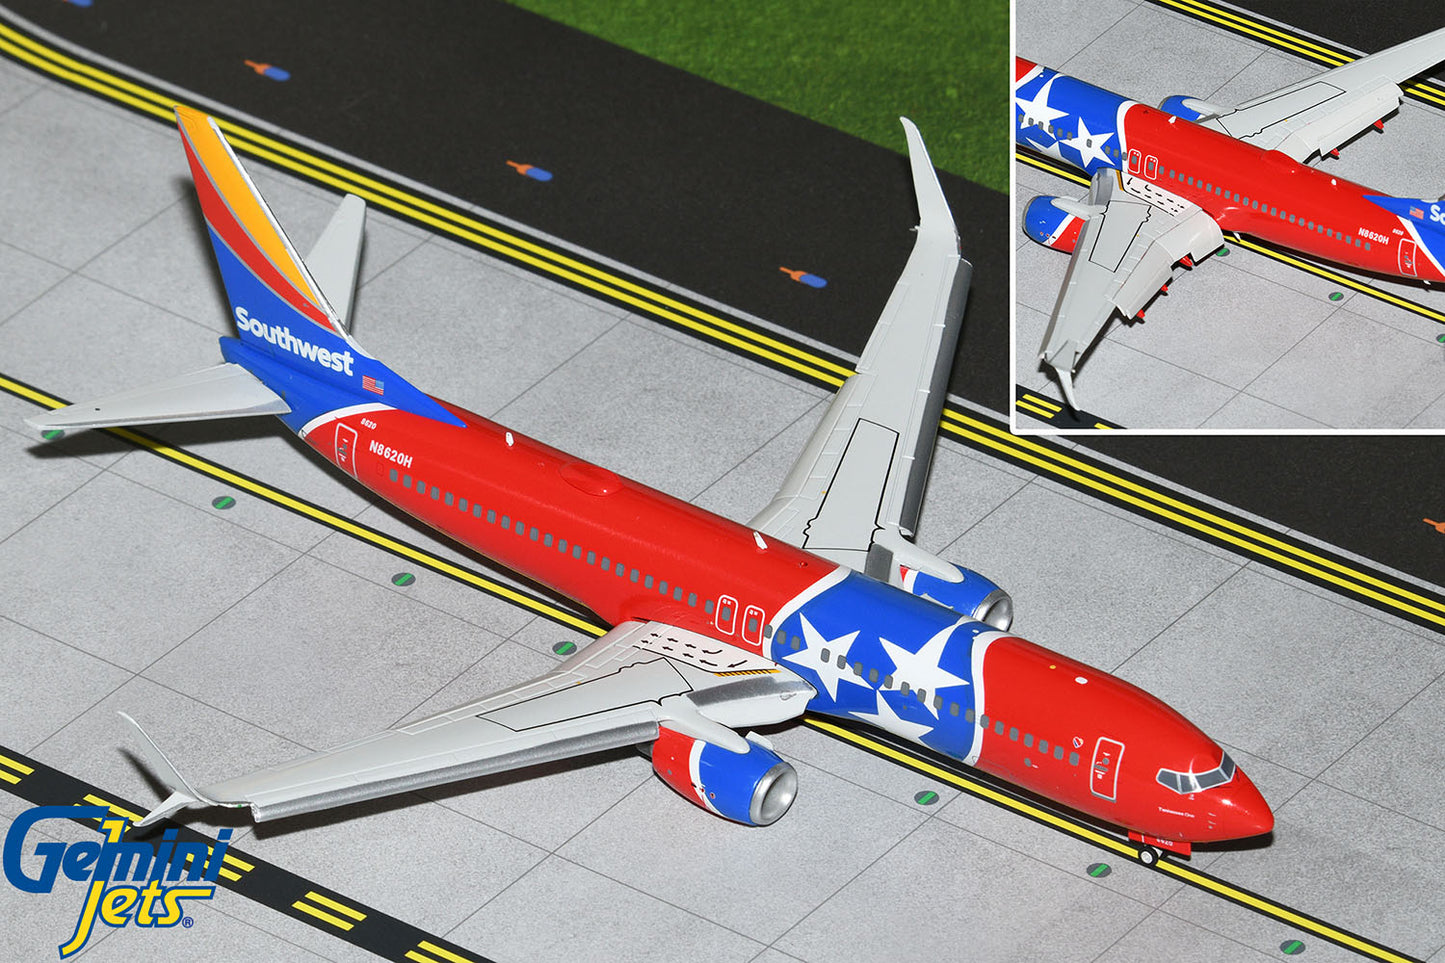 Gemini200 Southwest Airlines Boeing 737-800 "Tennessee One" (Flaps Down) N8620H